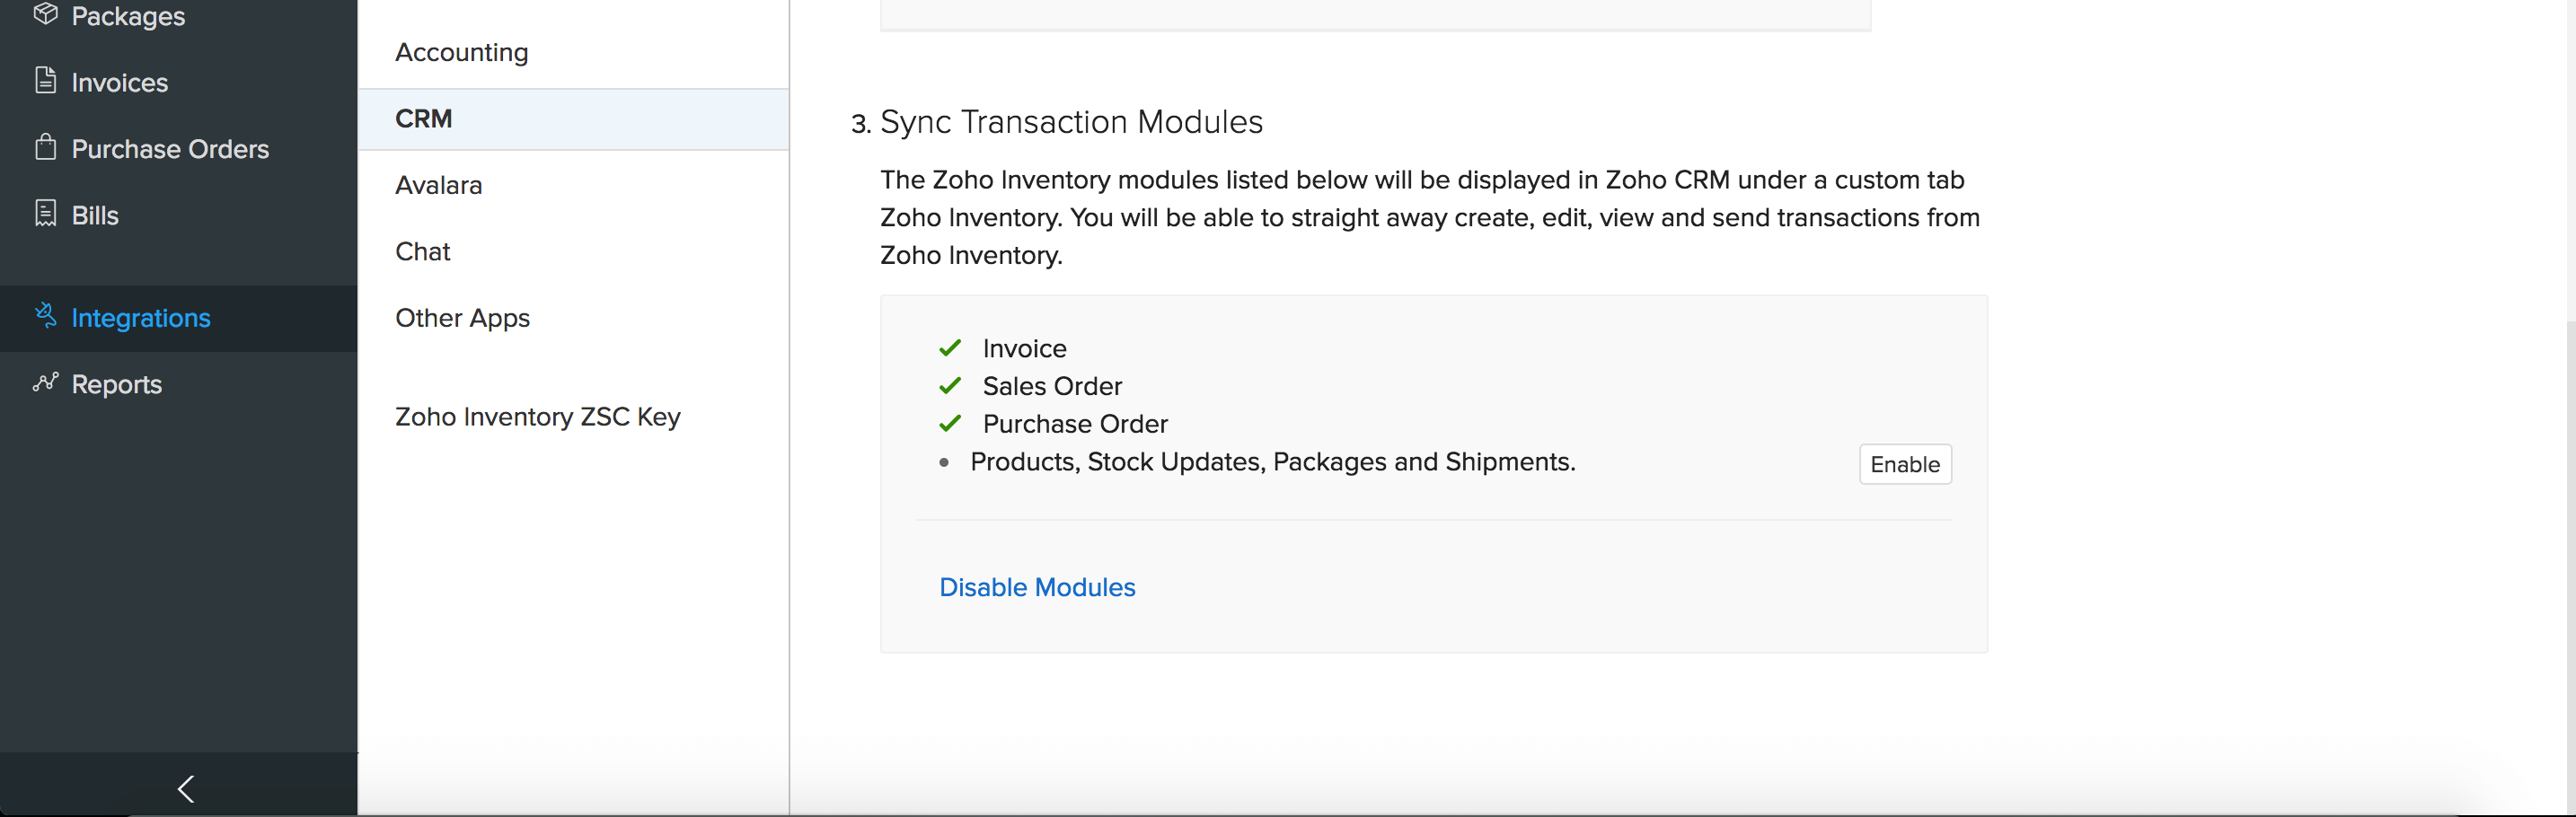 Image after enabling Zoho Books modules in crm